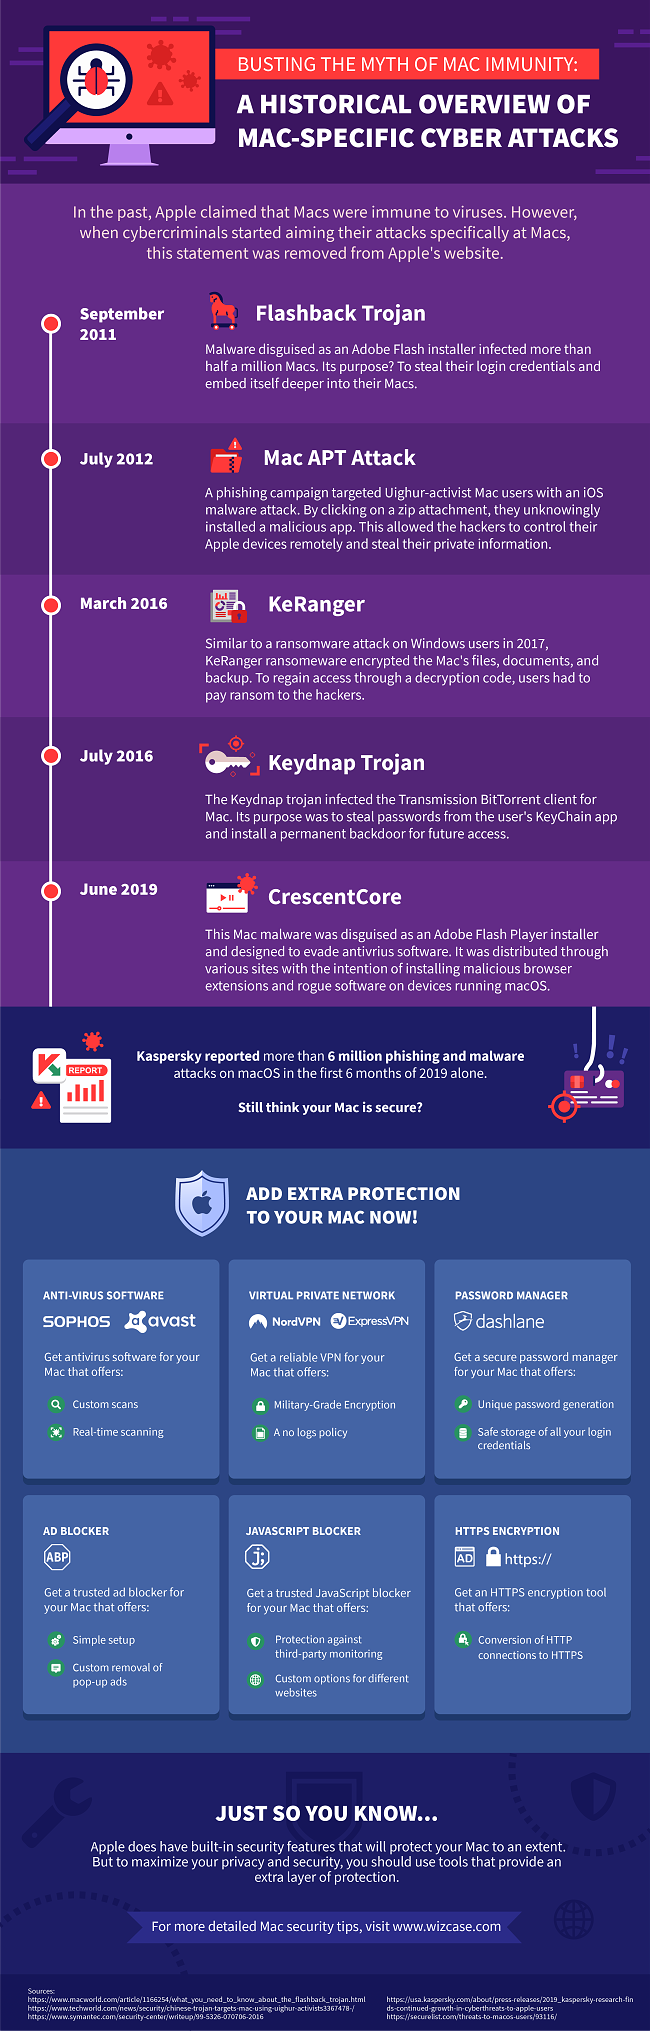 Infographic presentation of a Historical Overview of Mac Specific Cyber Attacks showing monthly data for different cyber attacks and suggestions on how to protect from them